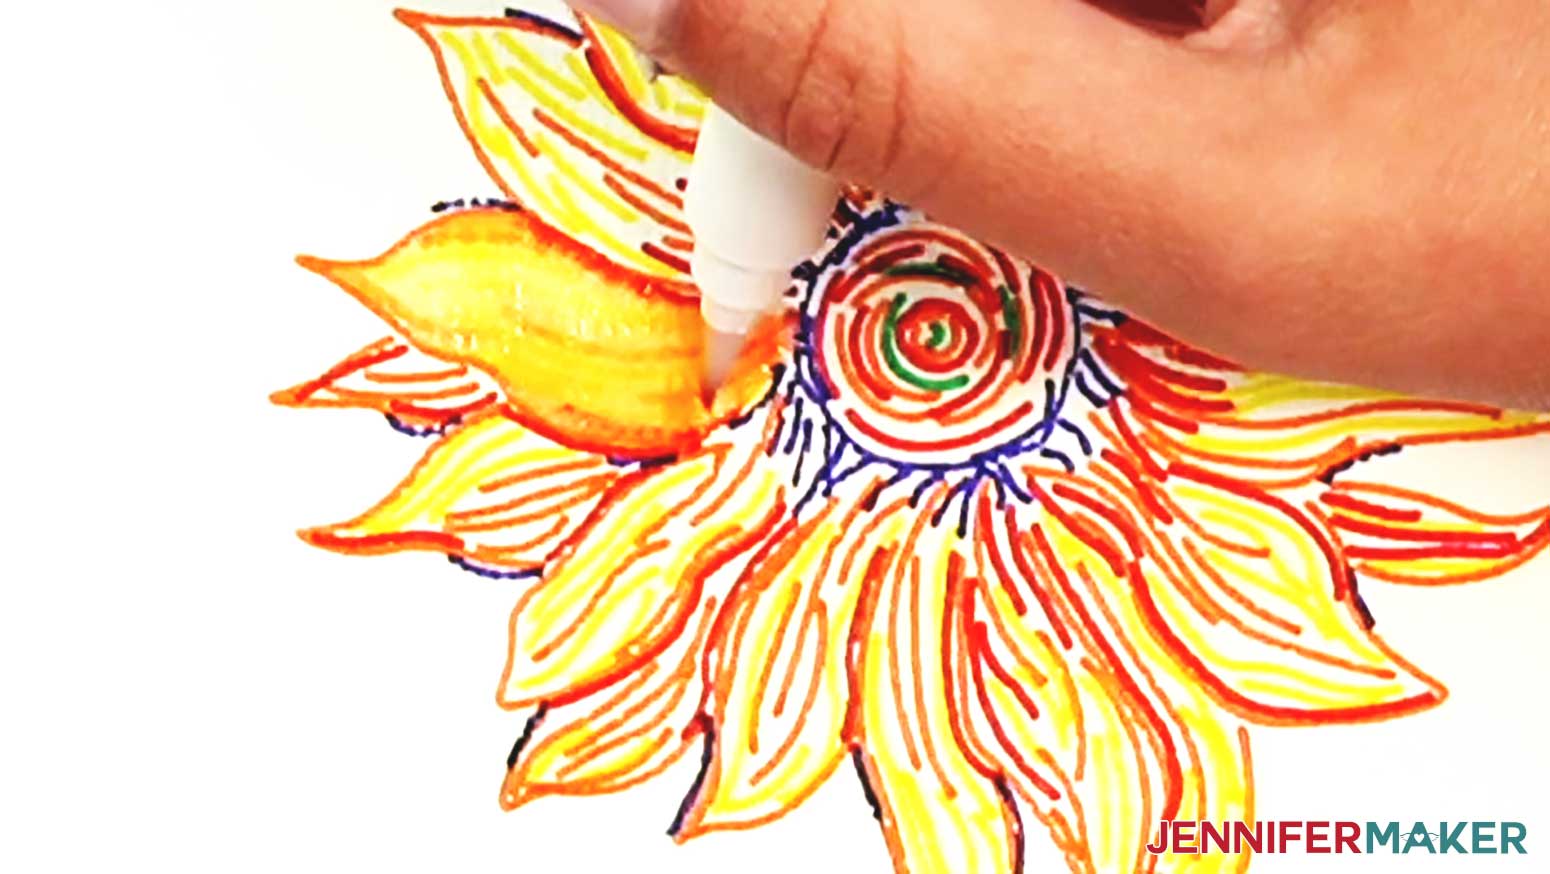 Smooth the red lines of the edges of the petals into the yellow area to create shading on the watercolor sunflower.